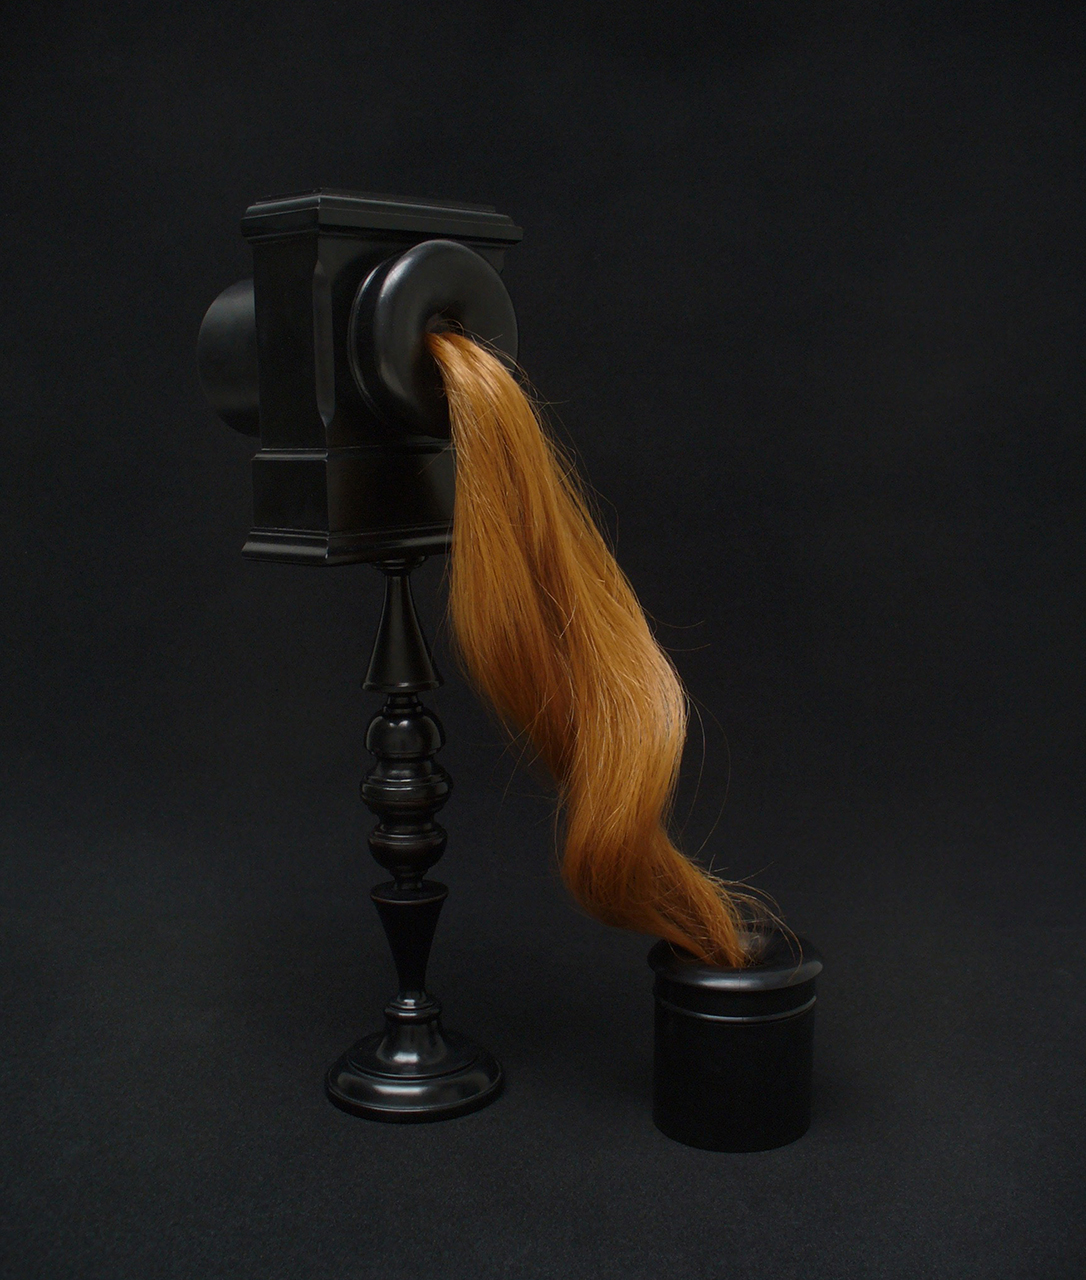 A sculpture made from repurposed ebony and human hair. A black, shiny object that looks like an old fashioned candlestick telephone receiver with long, shiny, styled, auburn hair connecting the listener and receiver.